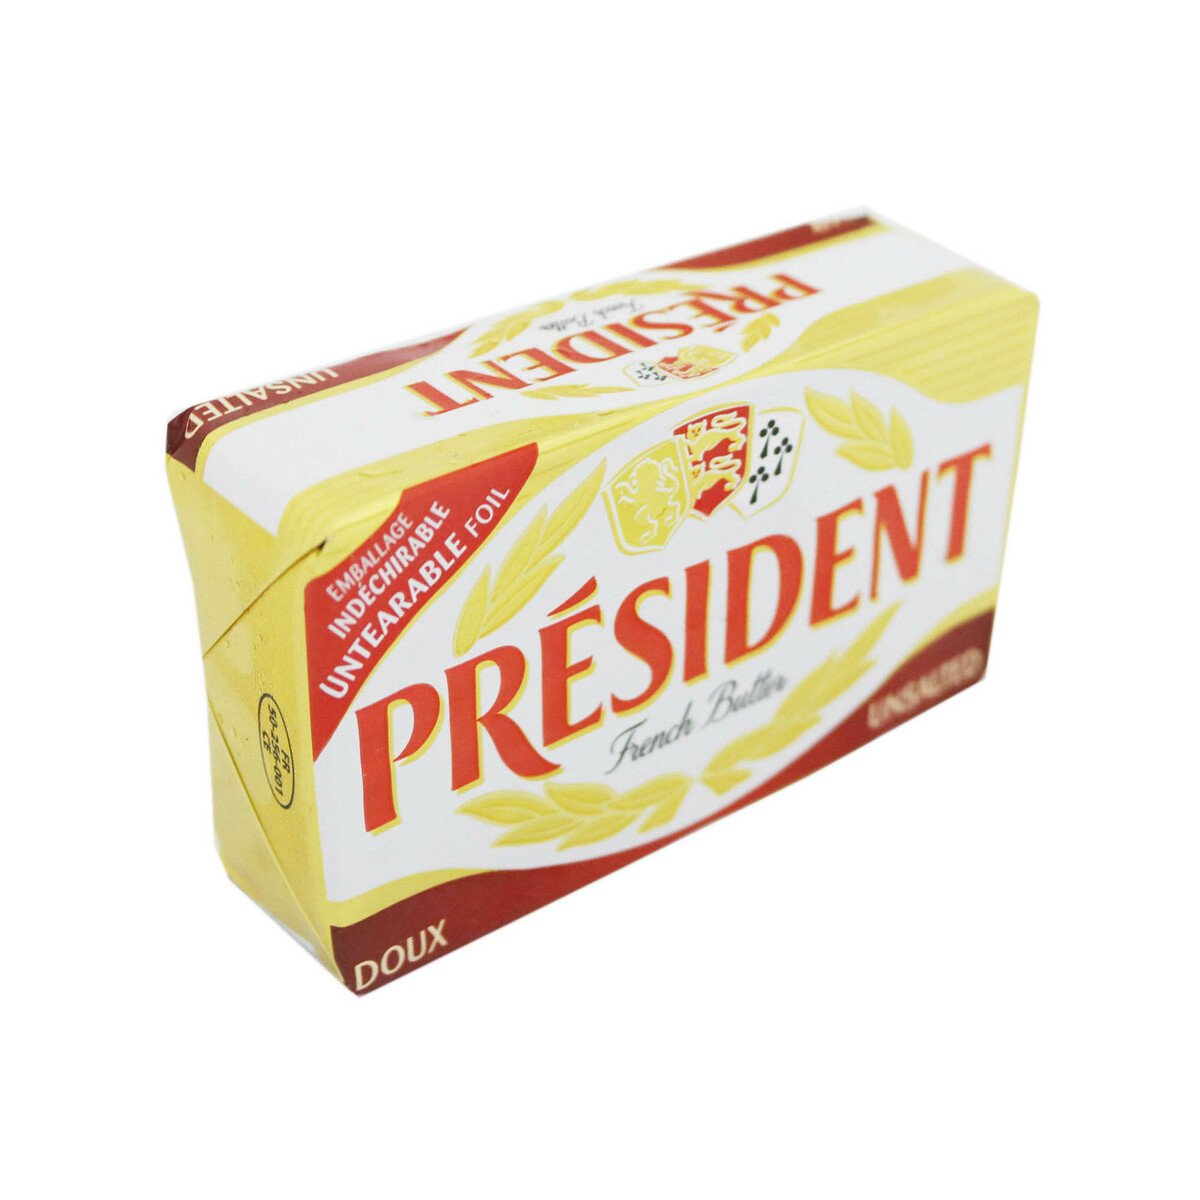 President Processed 8 Portion 140g